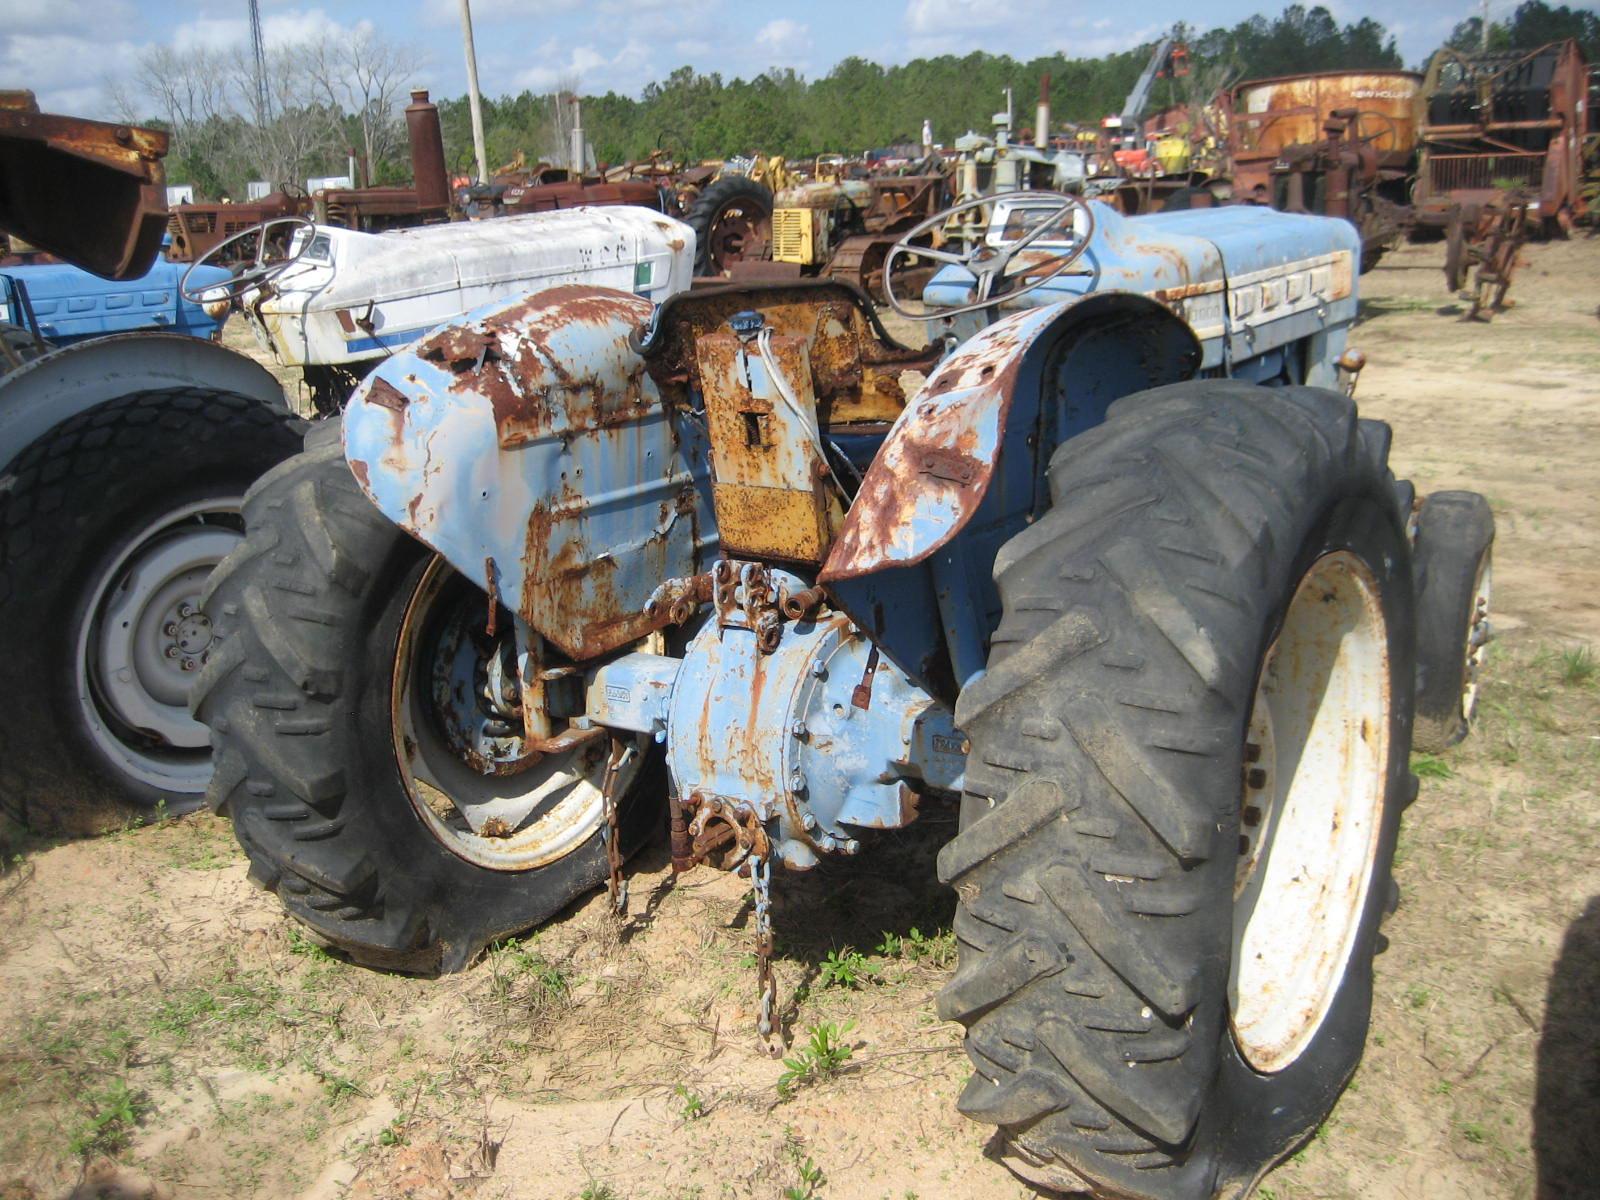 Ford 3000 Tractor: Diesel Eng., 5272 hrs